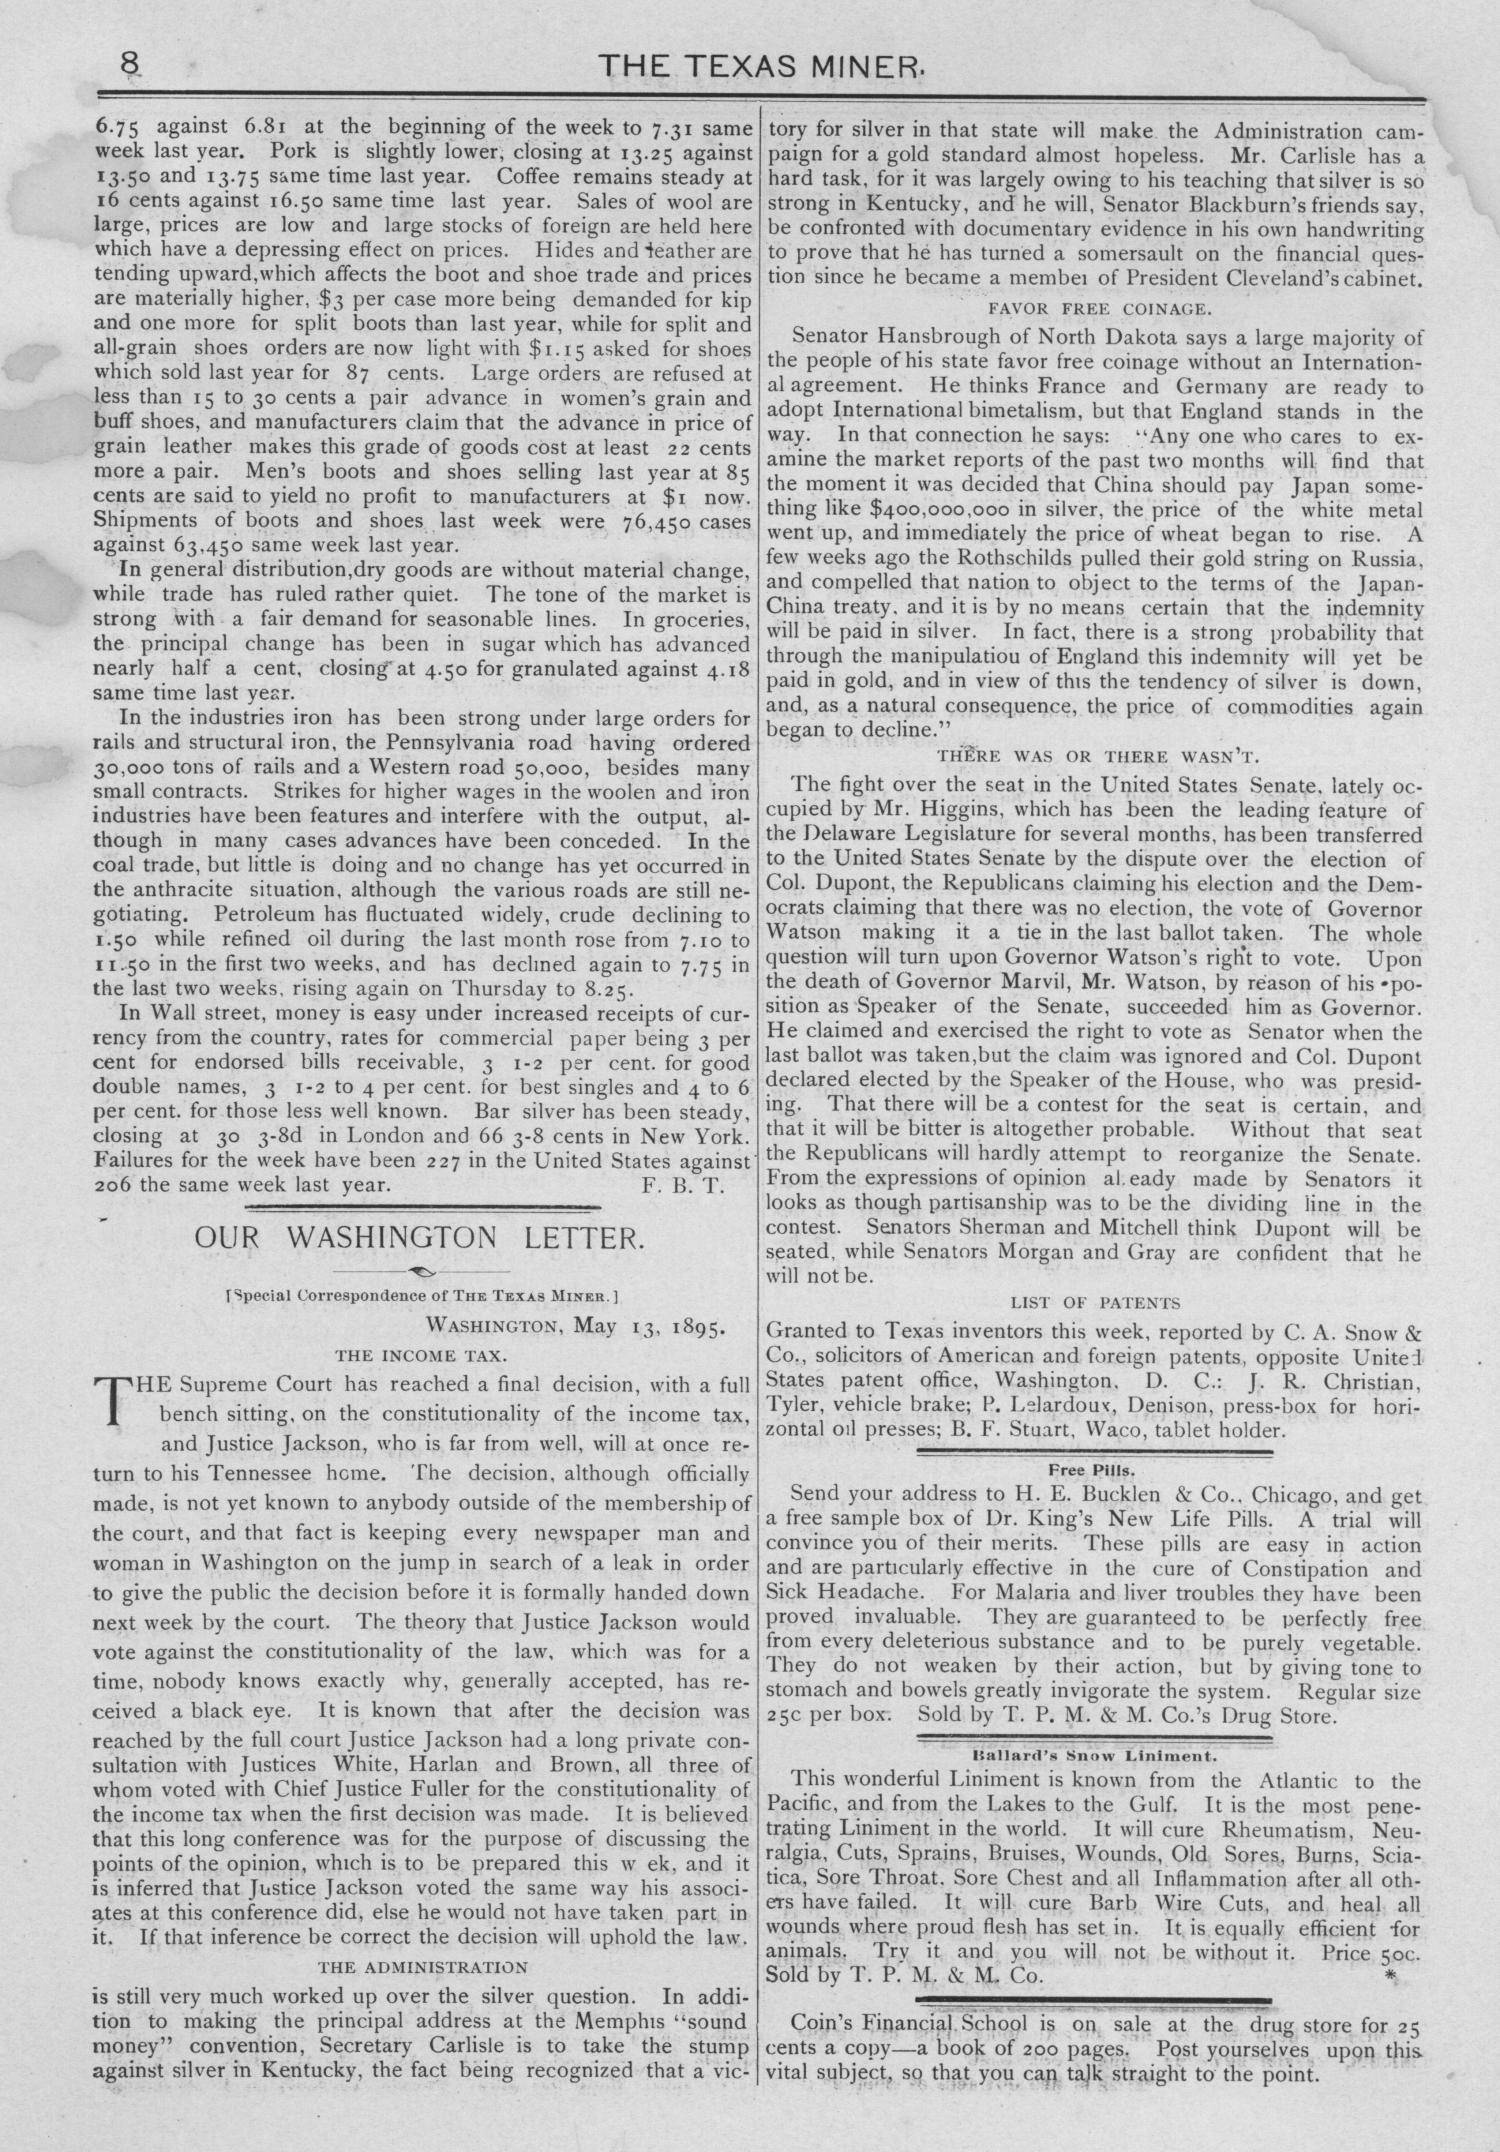 The Texas Miner, Volume 2, Number 18, May 18, 1895
                                                
                                                    8
                                                